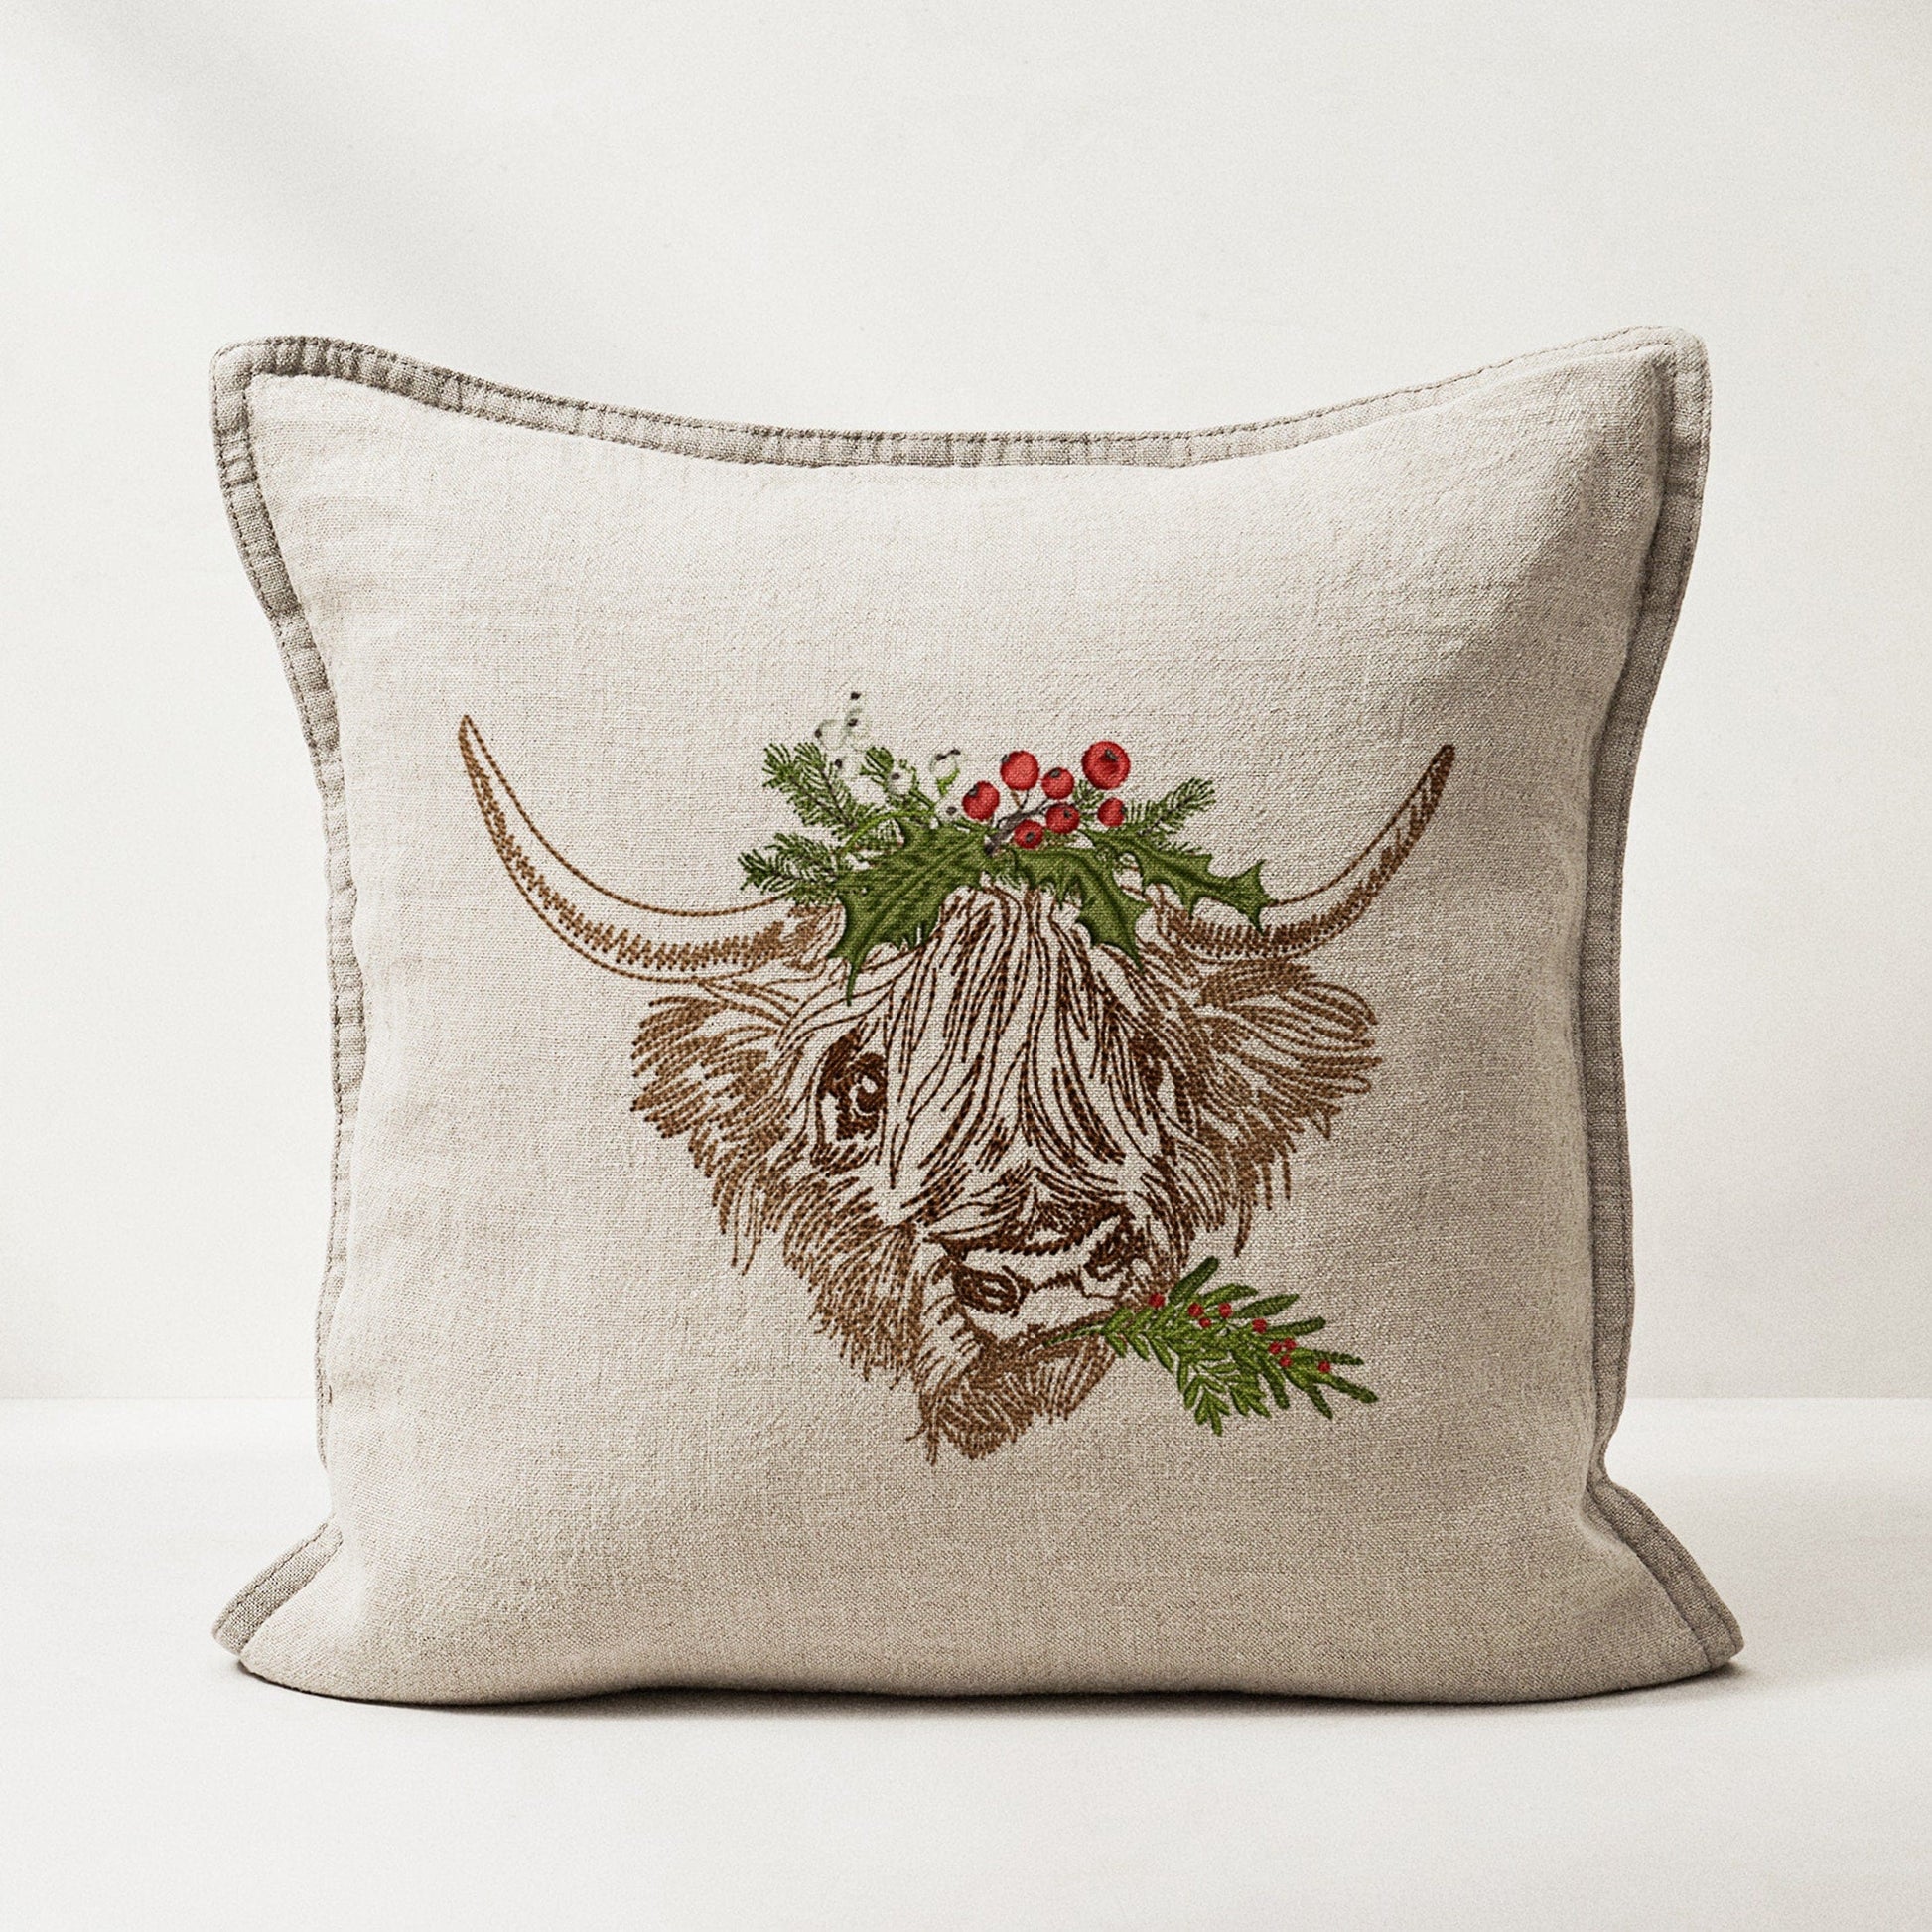 Christmas Highland Cow Machine Embroidery Design on linen pillow